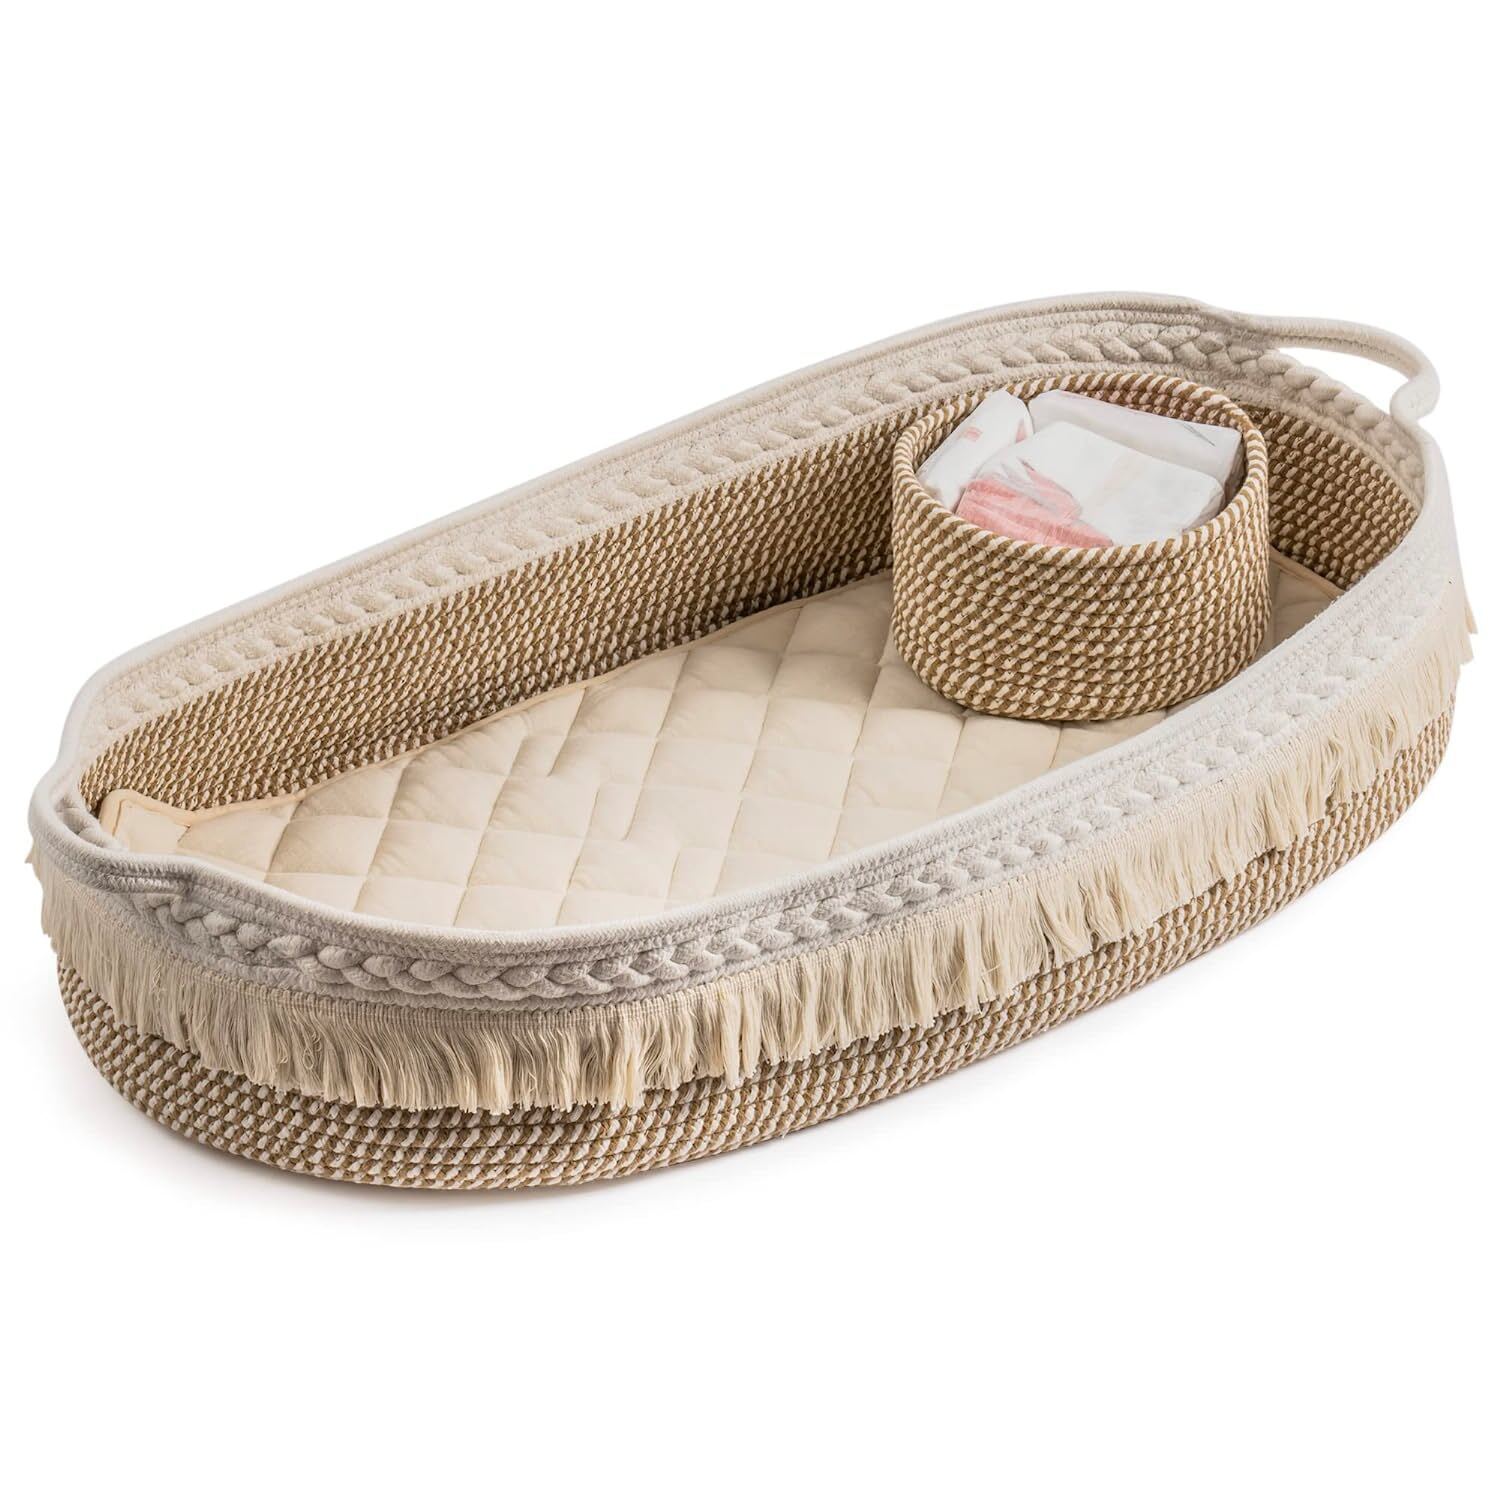 Handmade Woven Cotton Rope Baby Moses Basket